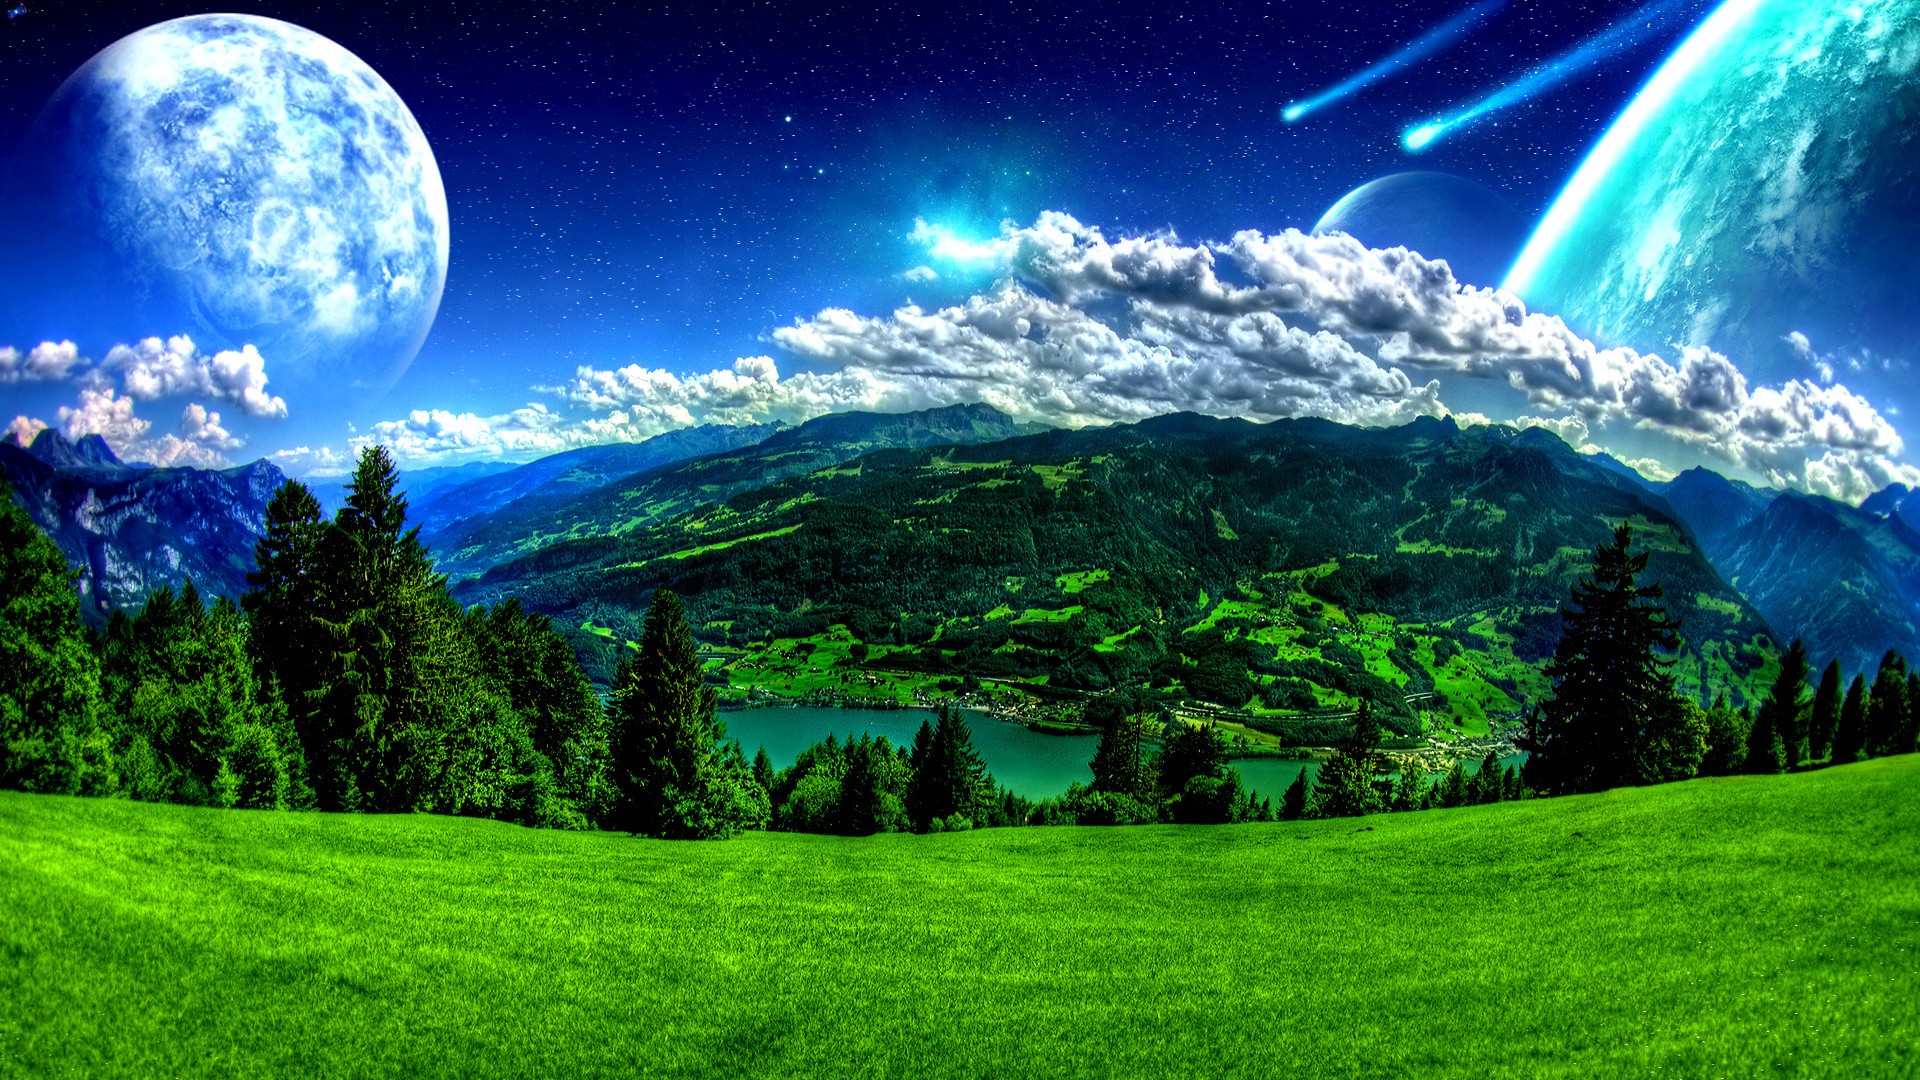 Landscapes Outer Wallpaper 1920x1080 Landscapes Outer Space Moon